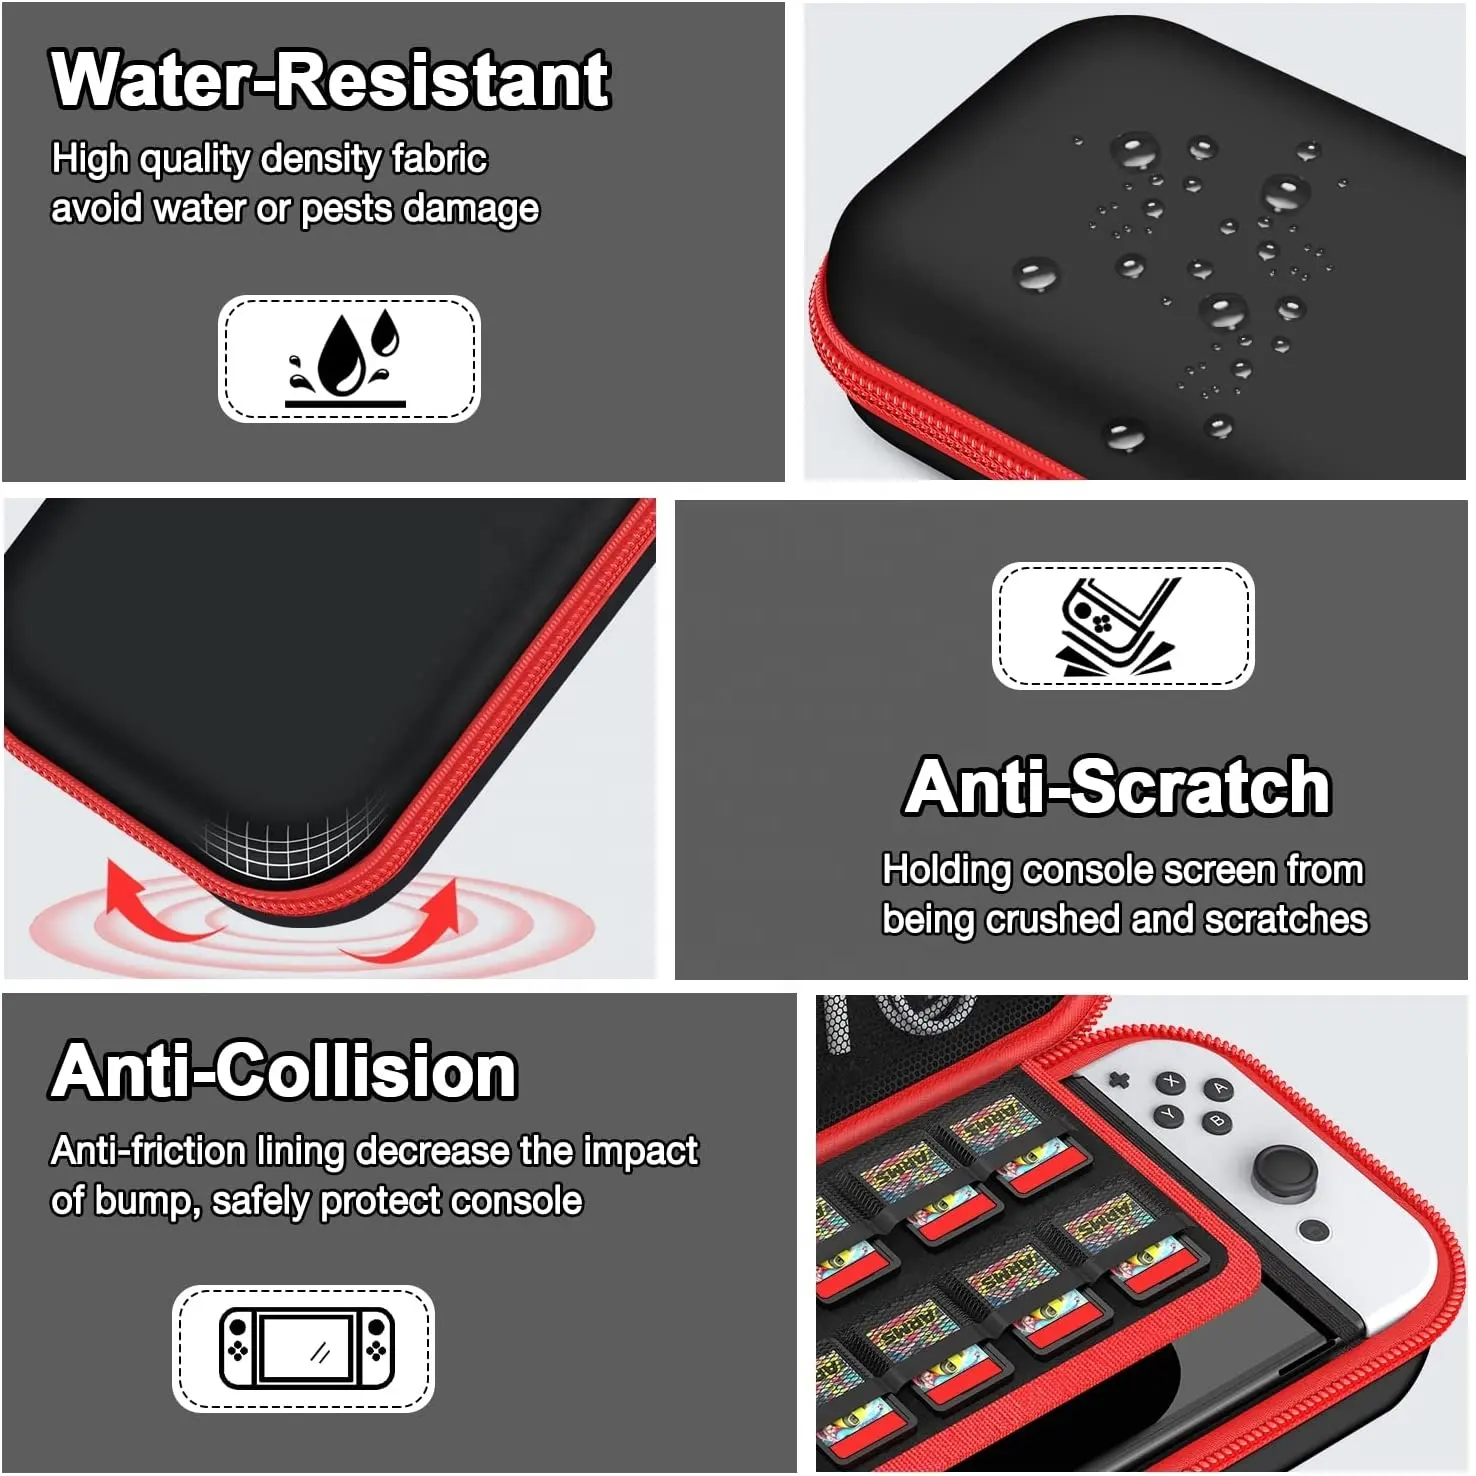 Black Red Blue White Oxford Hard Eva Portable Carrying Case Storage Bag For Nintendo Switch Oled Console